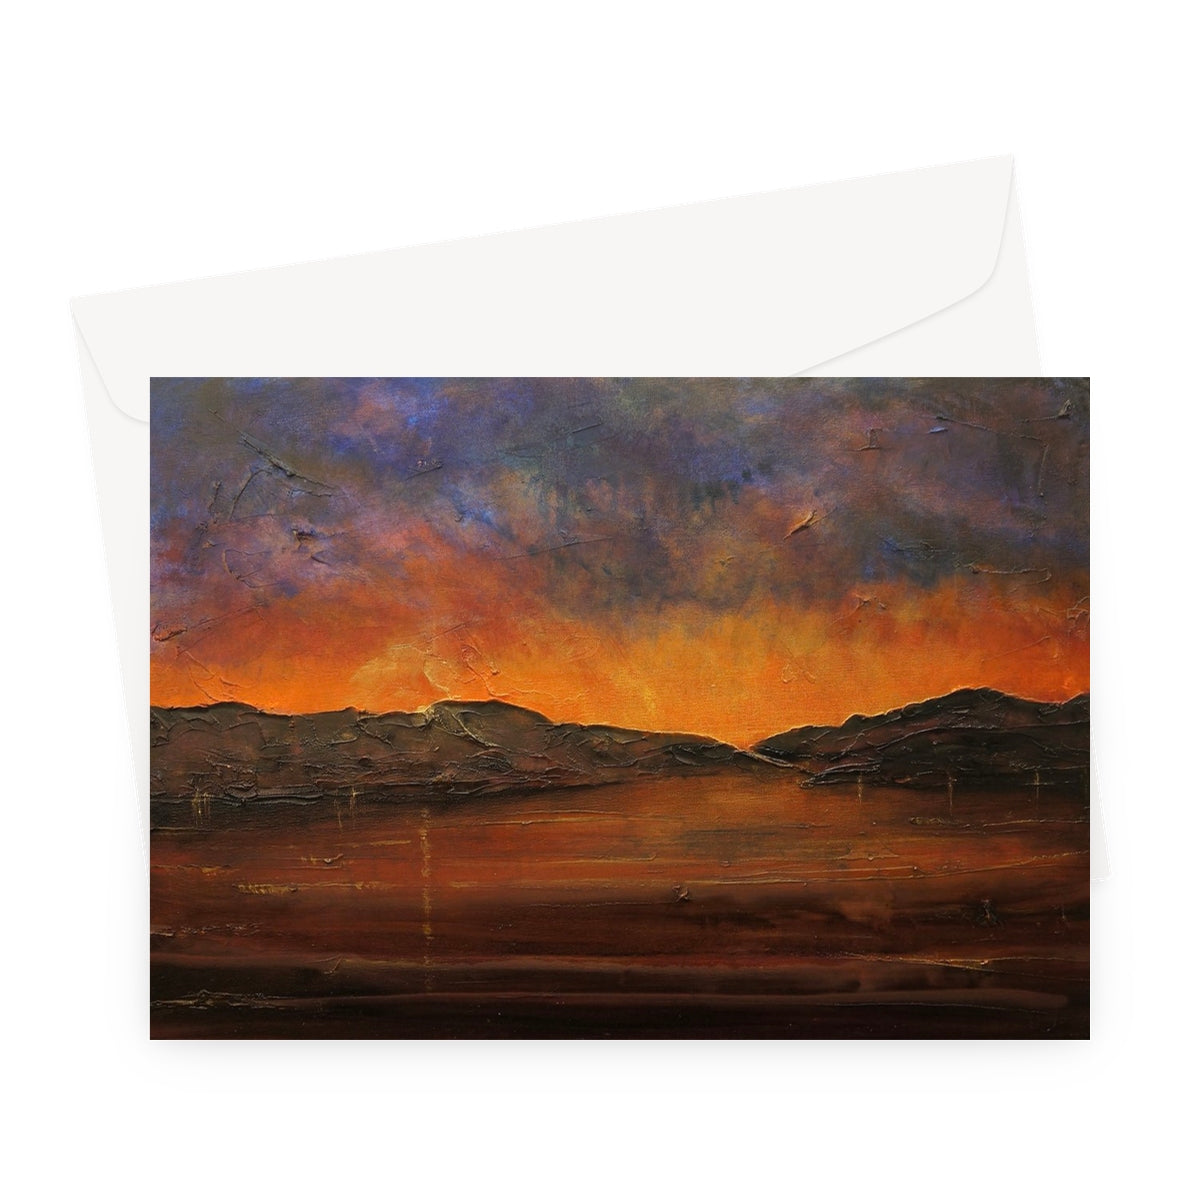 A Brooding Clyde Dusk Art Gifts Greeting Card-Greetings Cards-River Clyde Art Gallery-A5 Landscape-1 Card-Paintings, Prints, Homeware, Art Gifts From Scotland By Scottish Artist Kevin Hunter